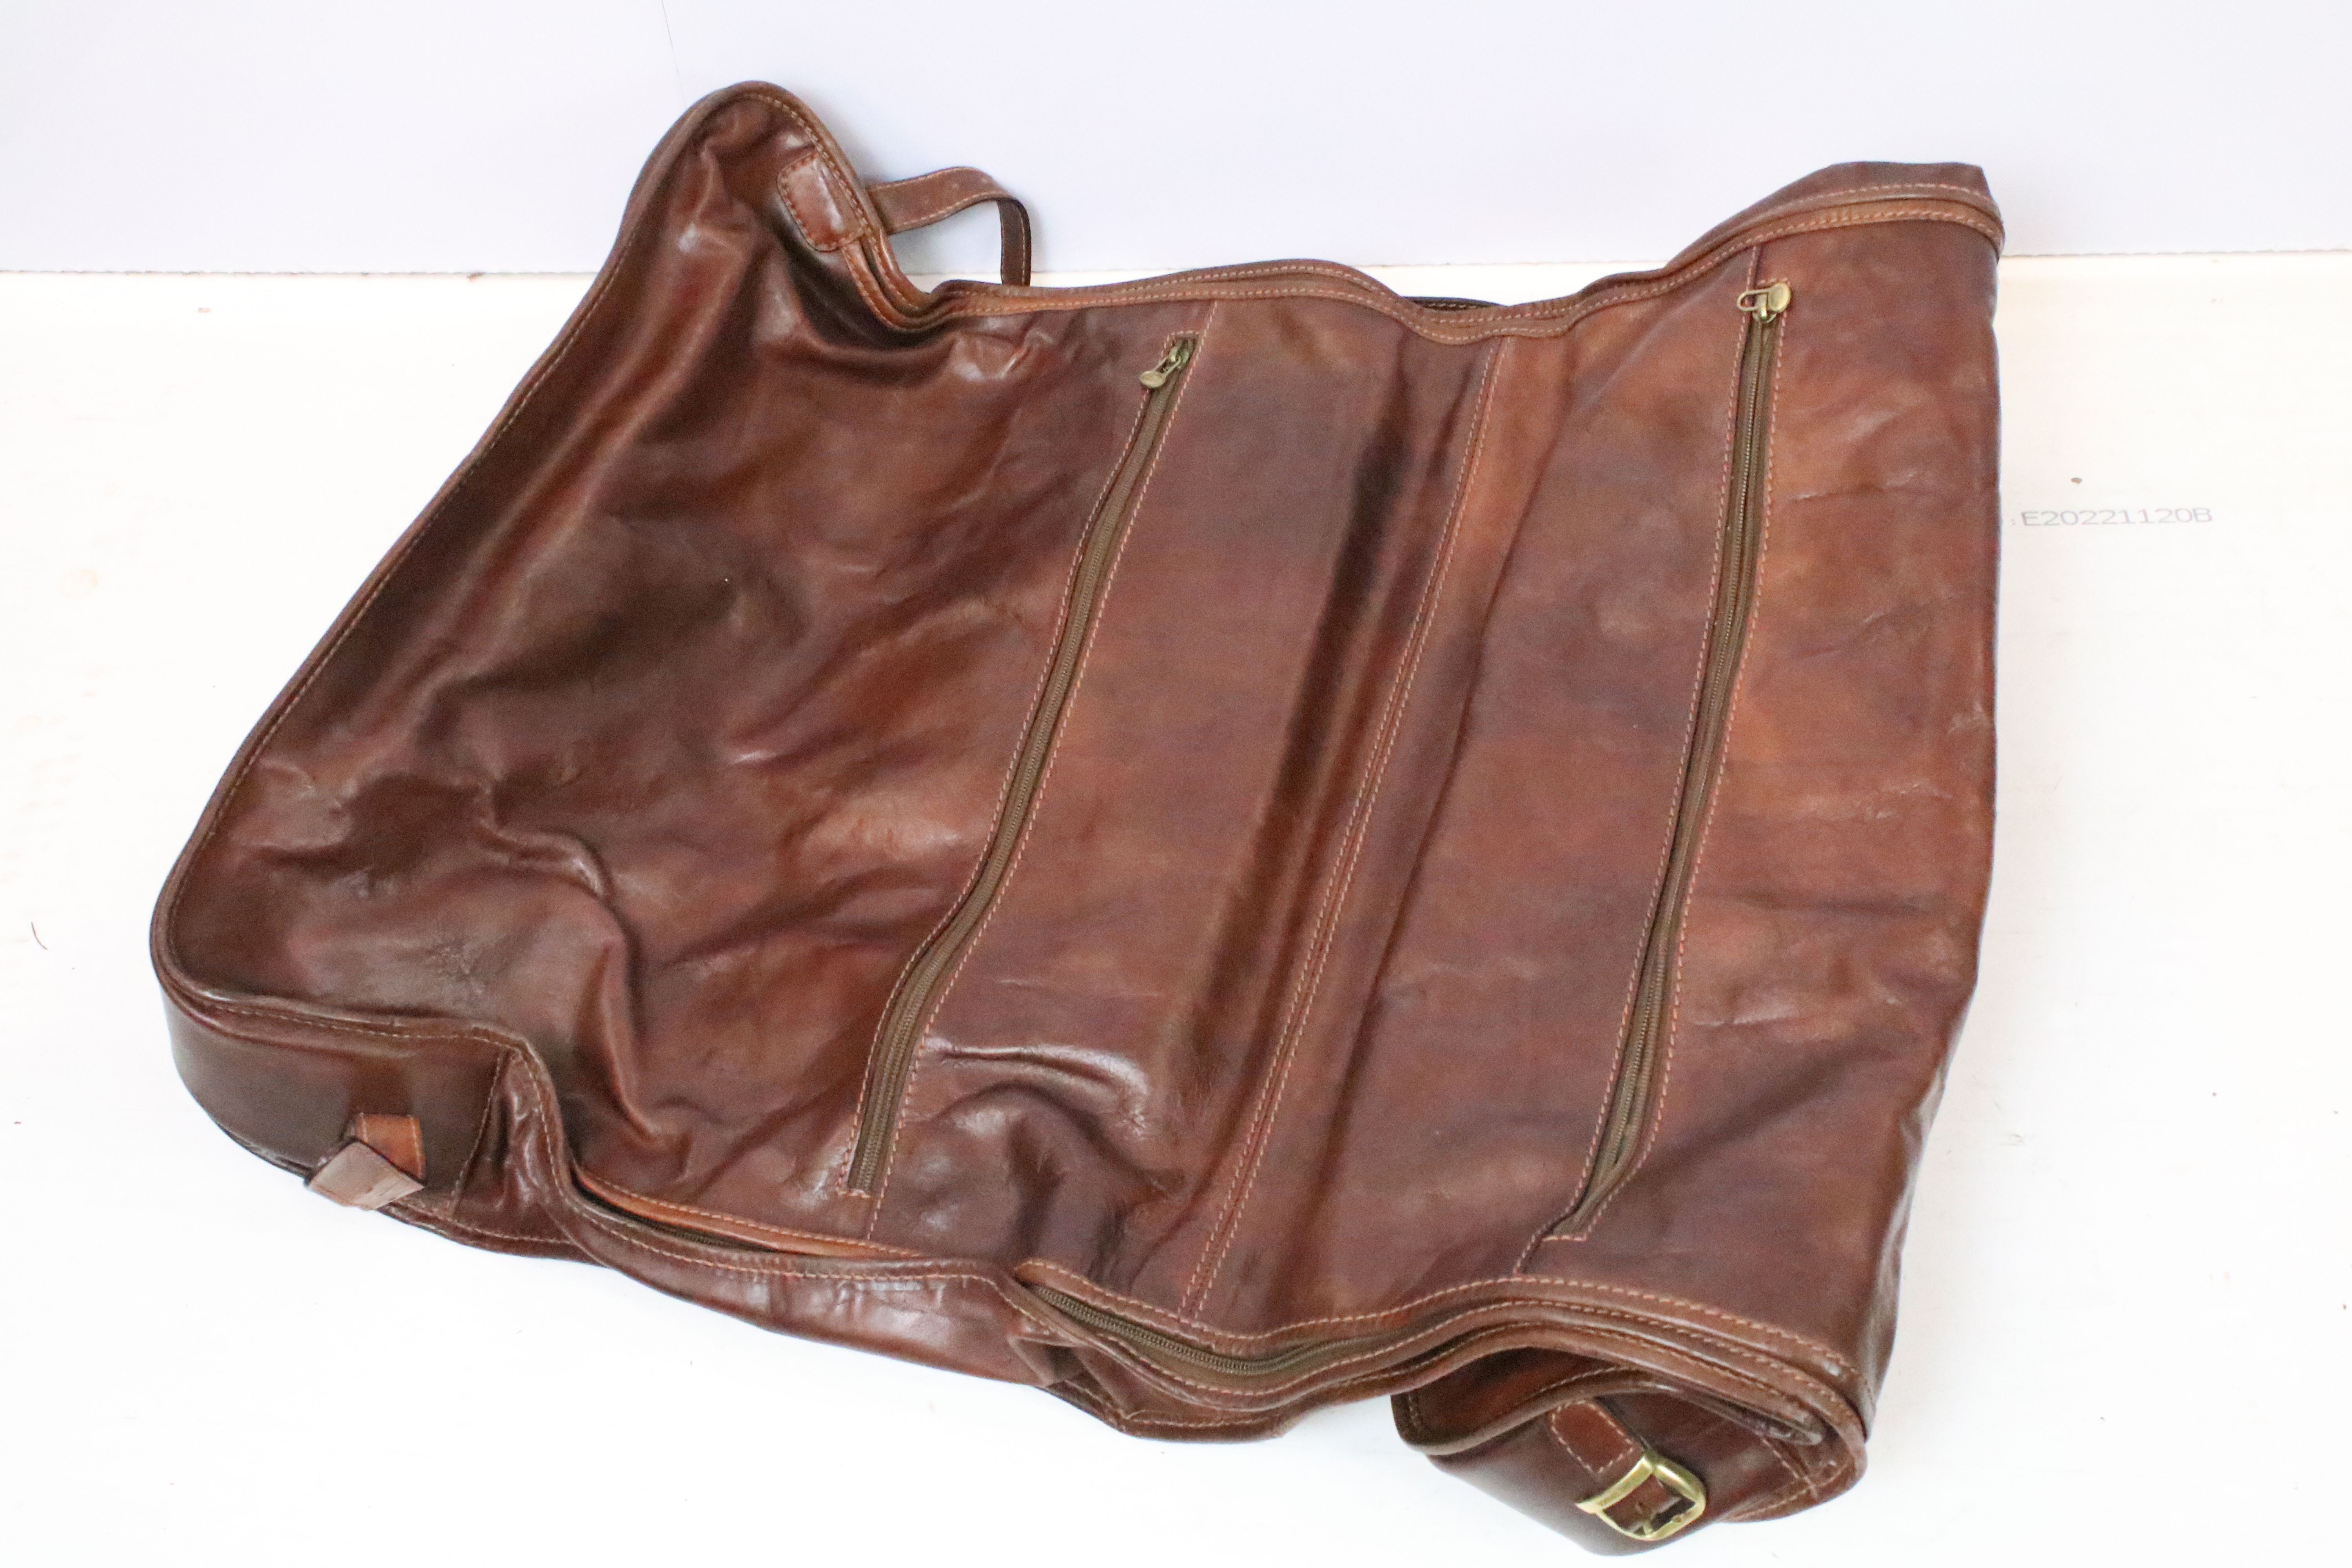 The Bridge brown leather folding garment bag with brass hard ware and dust bag. - Image 4 of 7